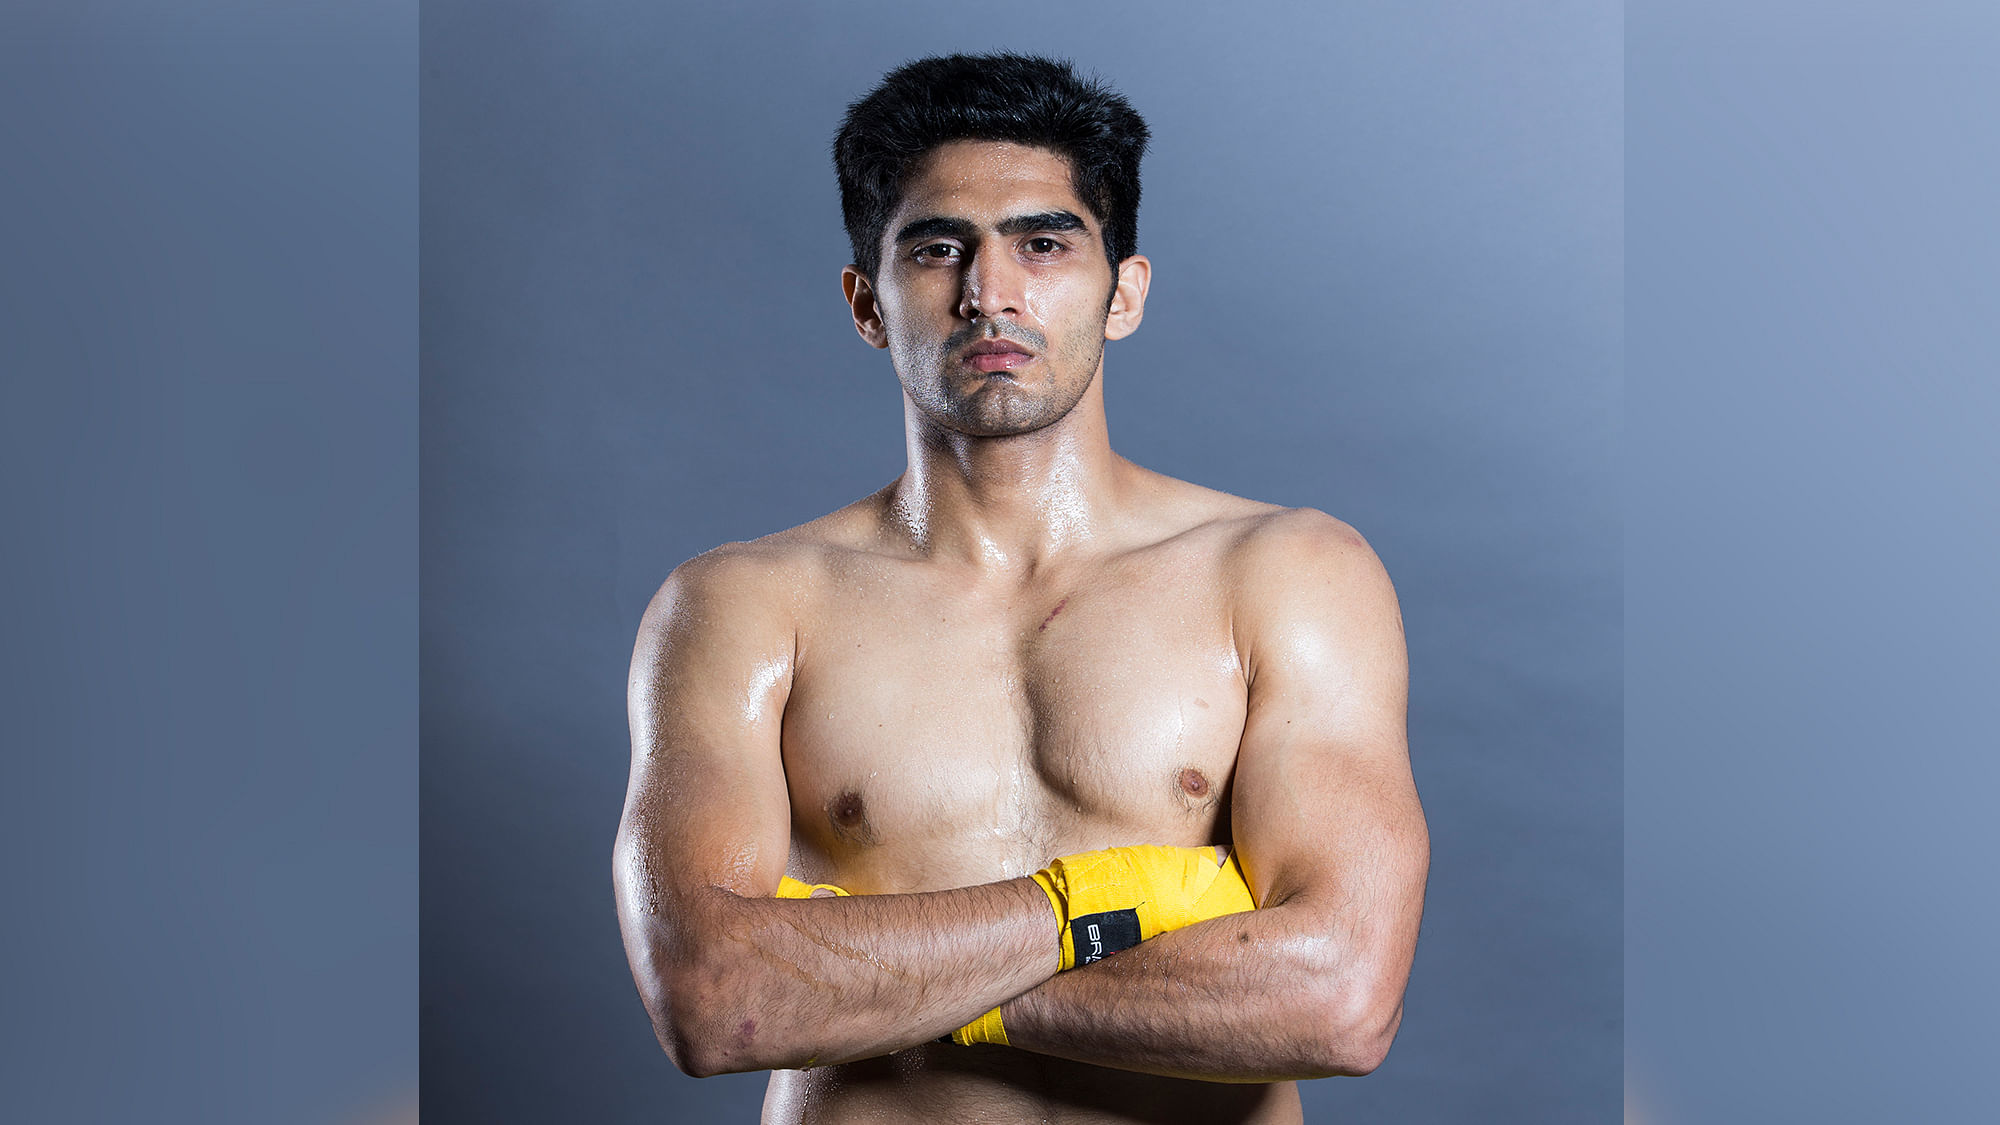 Vijender Singh is going to make his pro boxing debut on Saturday night in Manchester.